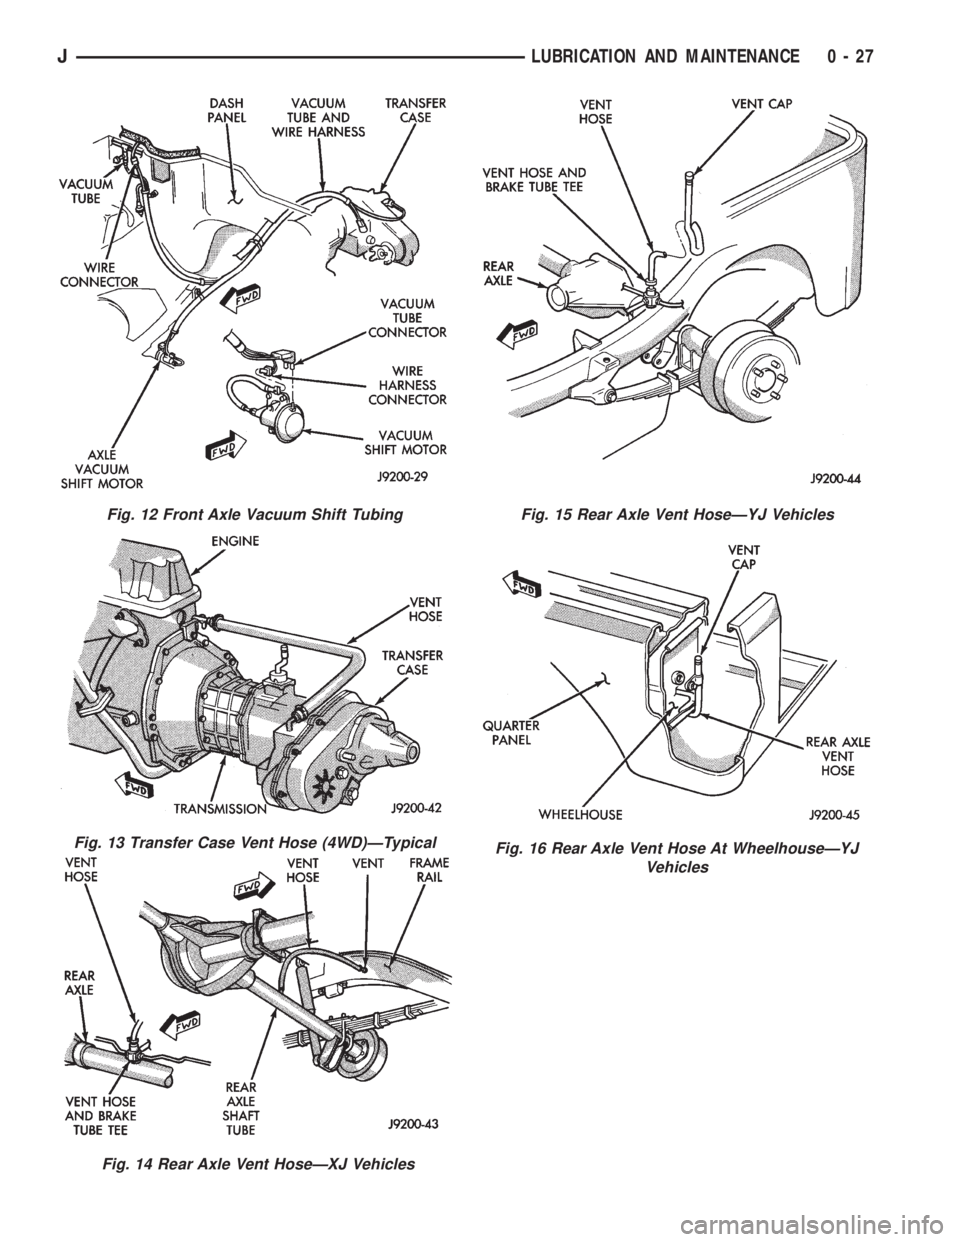 JEEP YJ 1995  Service And Service Manual Fig. 12 Front Axle Vacuum Shift Tubing
Fig. 13 Transfer Case Vent Hose (4WD)ÐTypical
Fig. 14 Rear Axle Vent HoseÐXJ Vehicles
Fig. 15 Rear Axle Vent HoseÐYJ Vehicles
Fig. 16 Rear Axle Vent Hose At W